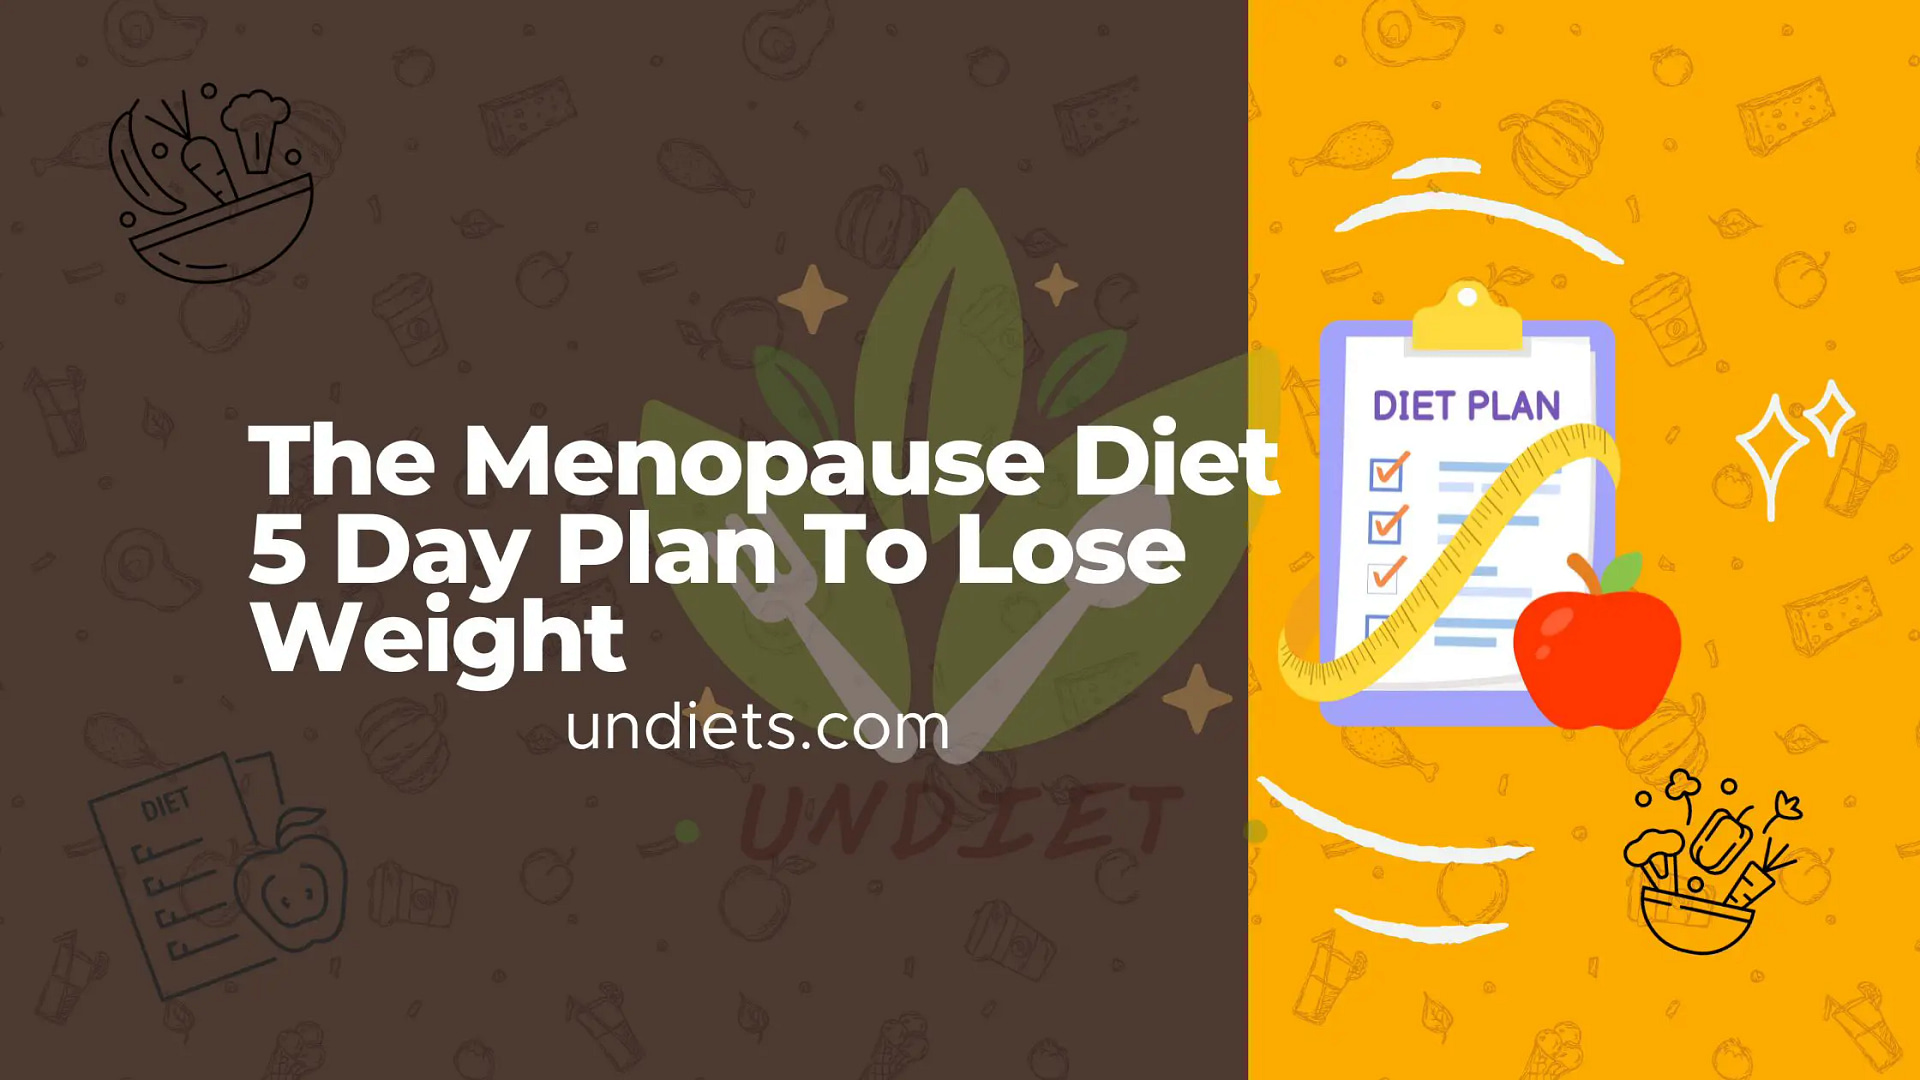 The Menopause Diet 5 Day Plan To Lose Weight 2